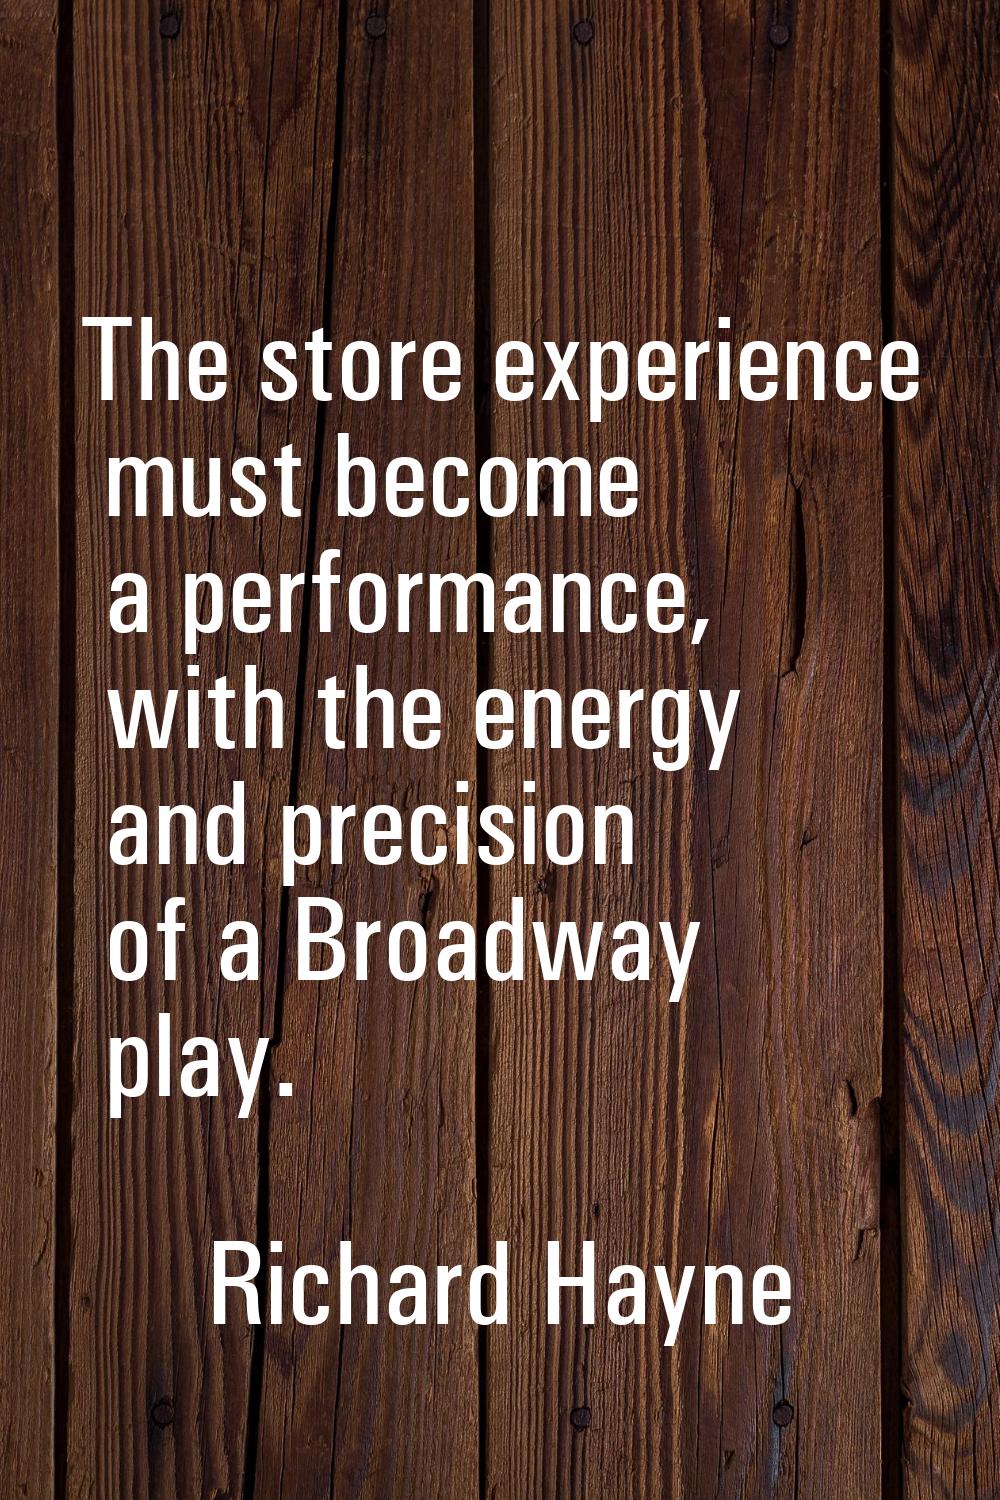 The store experience must become a performance, with the energy and precision of a Broadway play.